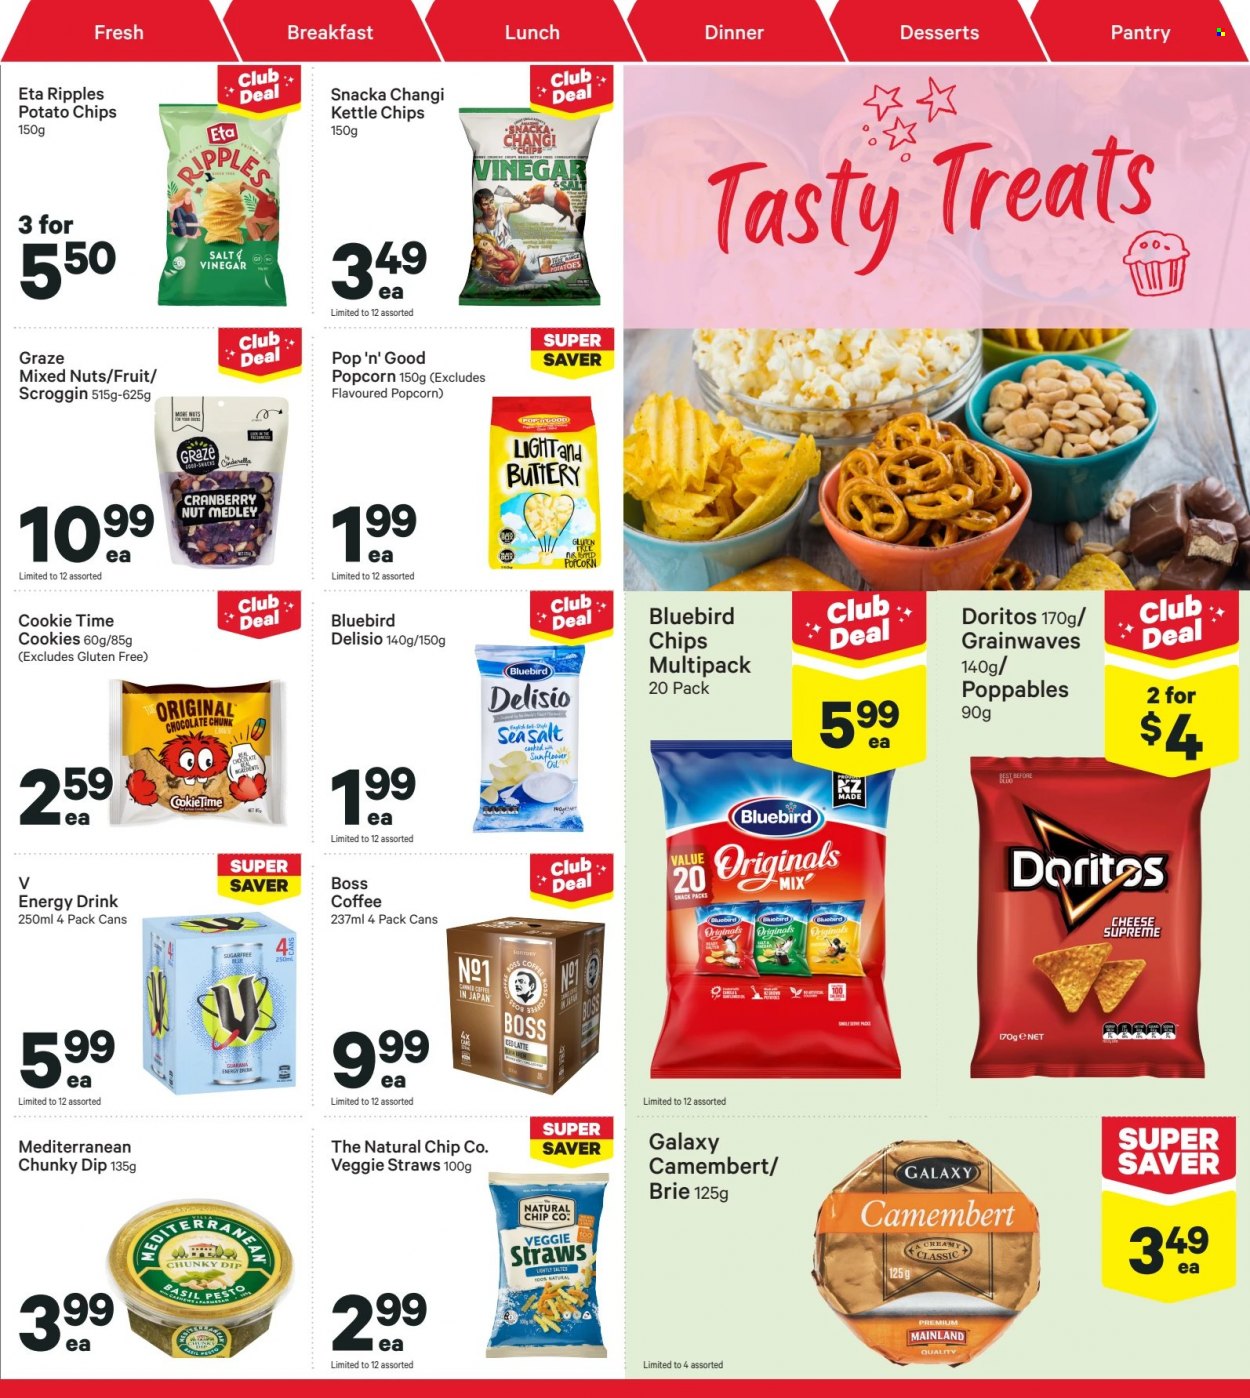 thumbnail - New World mailer - 27.06.2022 - 03.07.2022 - Sales products - camembert, cheese, brie, dip, cookies, chocolate, Doritos, potato chips, chips, Bluebird, popcorn, Delisio, Veggie Straws, oil, cashews, Graze, mixed nuts, energy drink, coffee. Page 25.